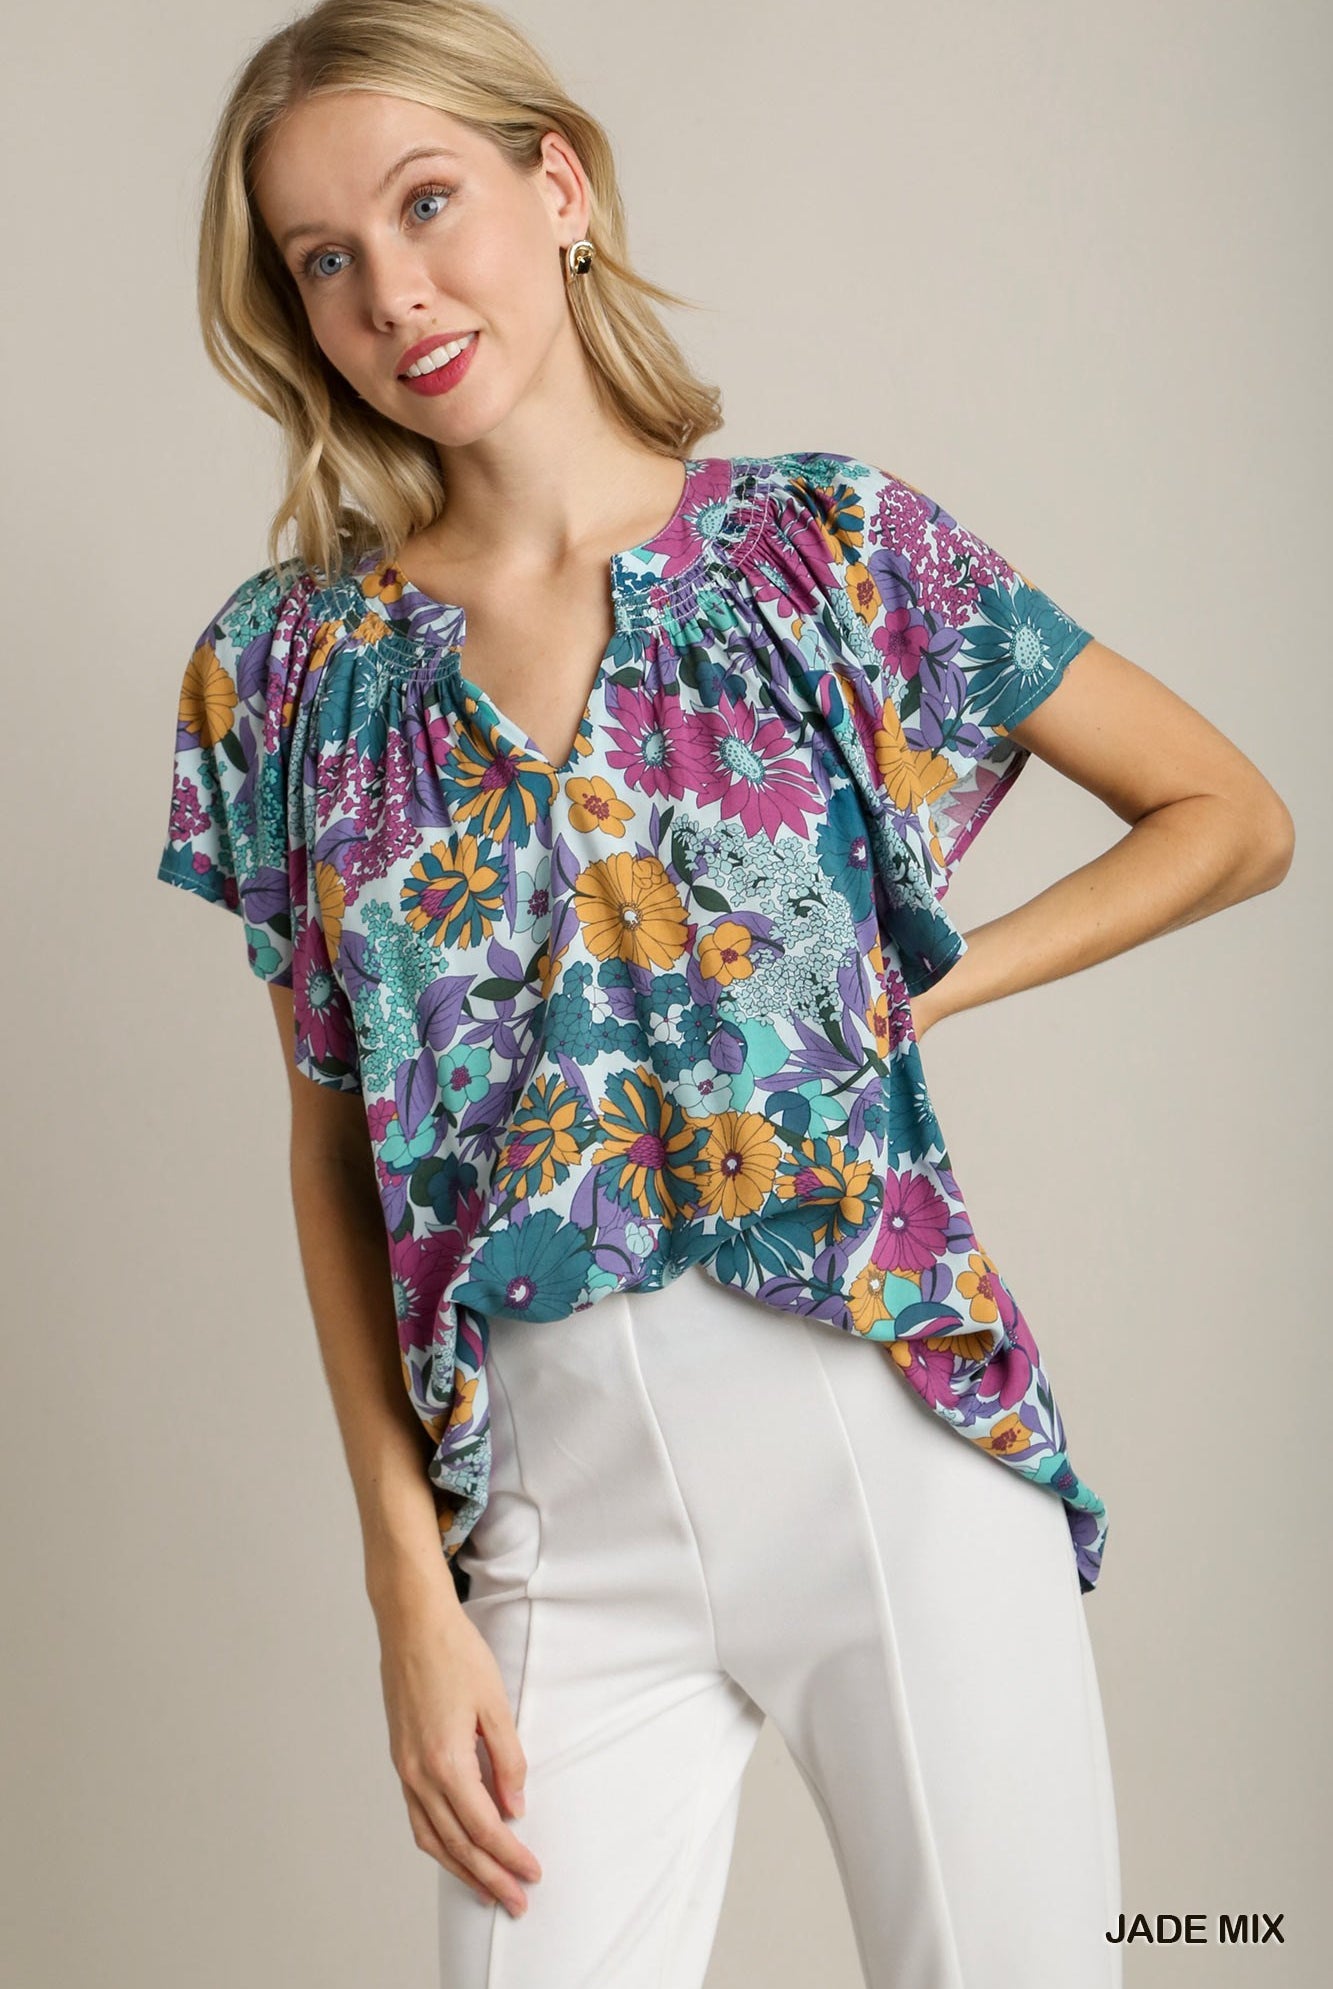 JADE MIX BOXY CUT FLORAL COLORFUL TOP / STUFFOLOGY BOUTIQUE-Top-Umgee-Stuffology - Where Vintage Meets Modern, A Boutique for Real Women in Crosbyton, TX